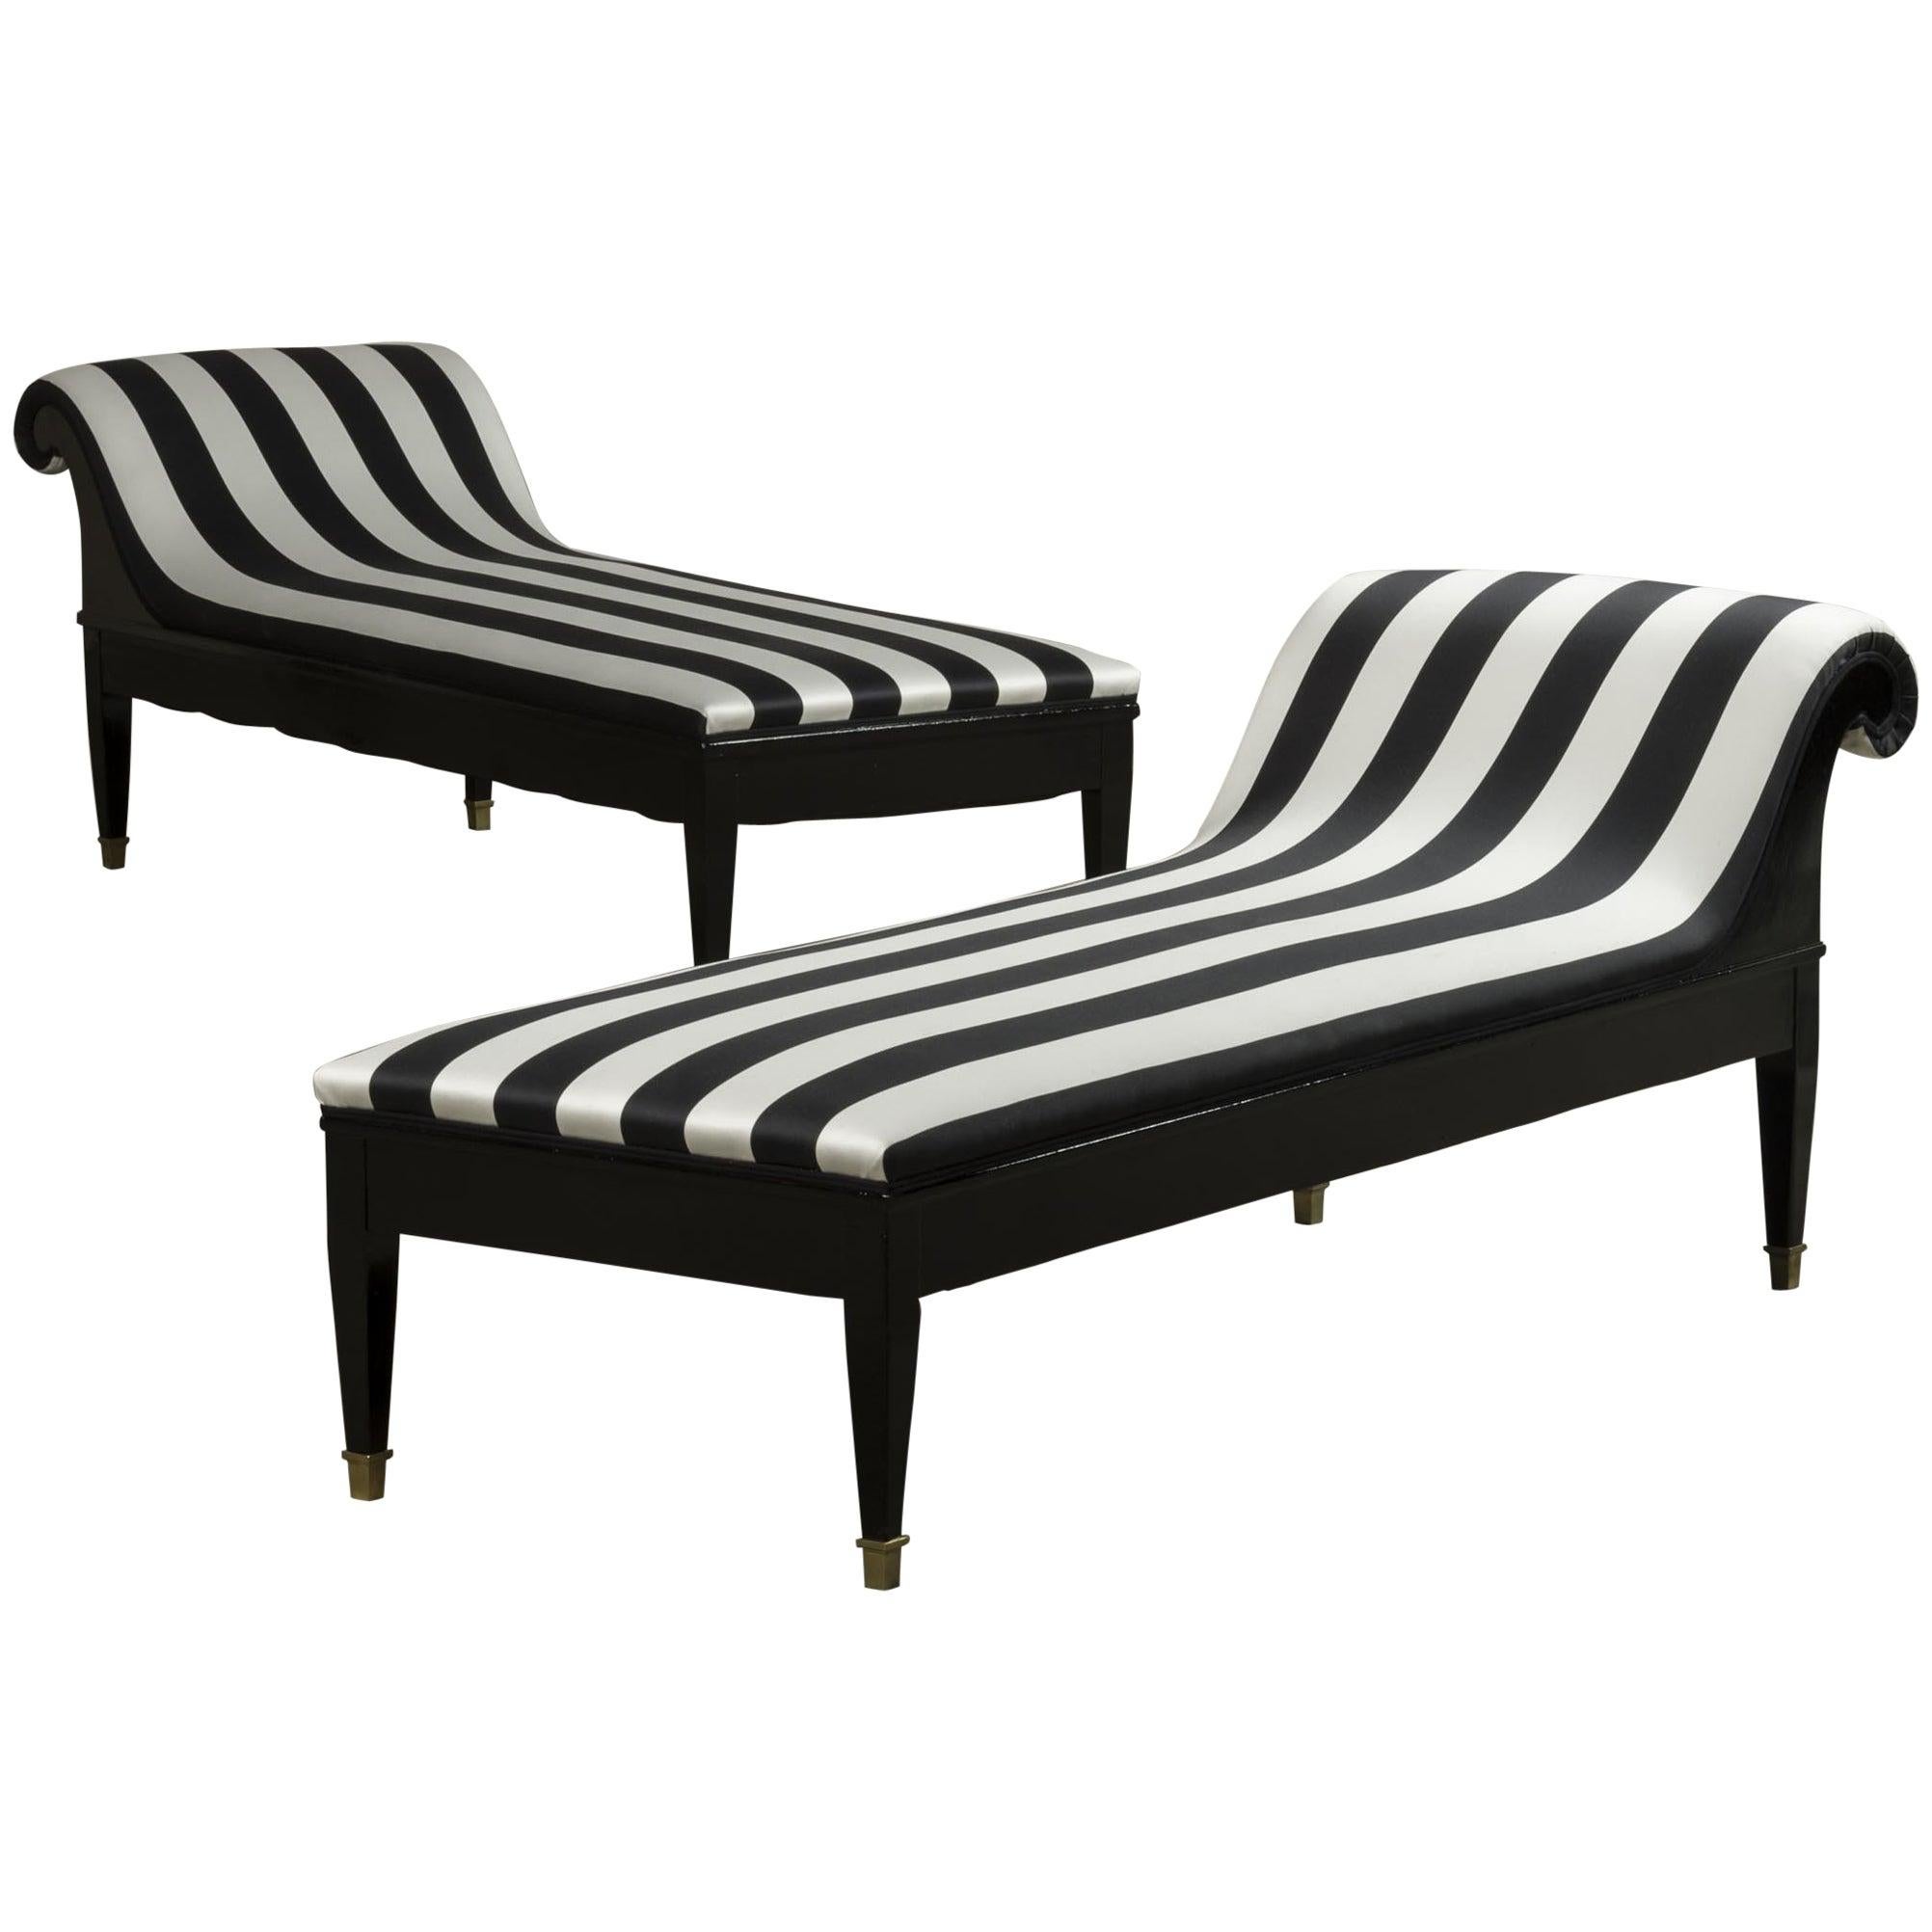 Art Deco Daybed Upholstered with Black and White Striped Fabric